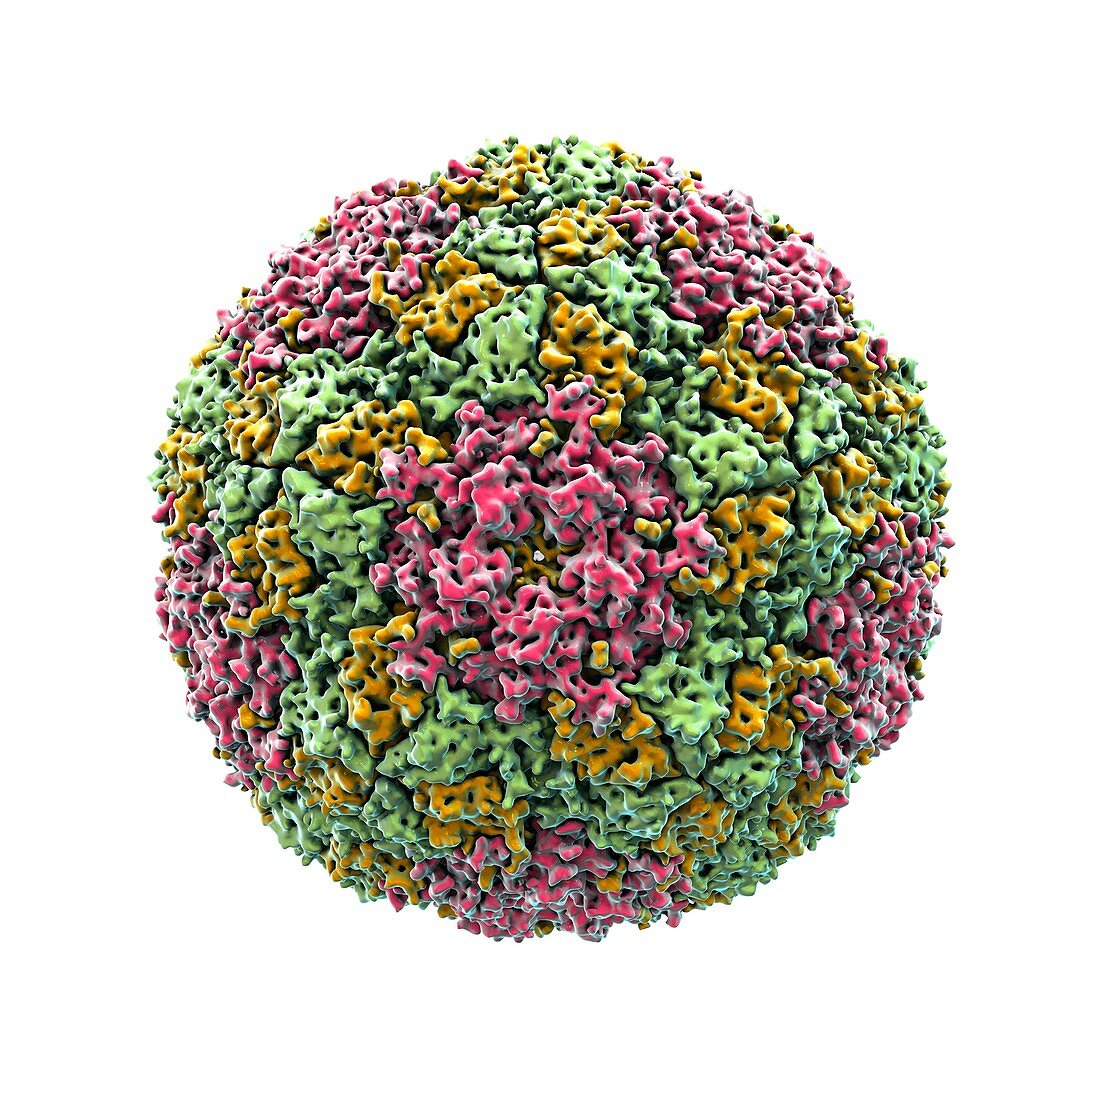 Foot and mouth virus particle,artwork